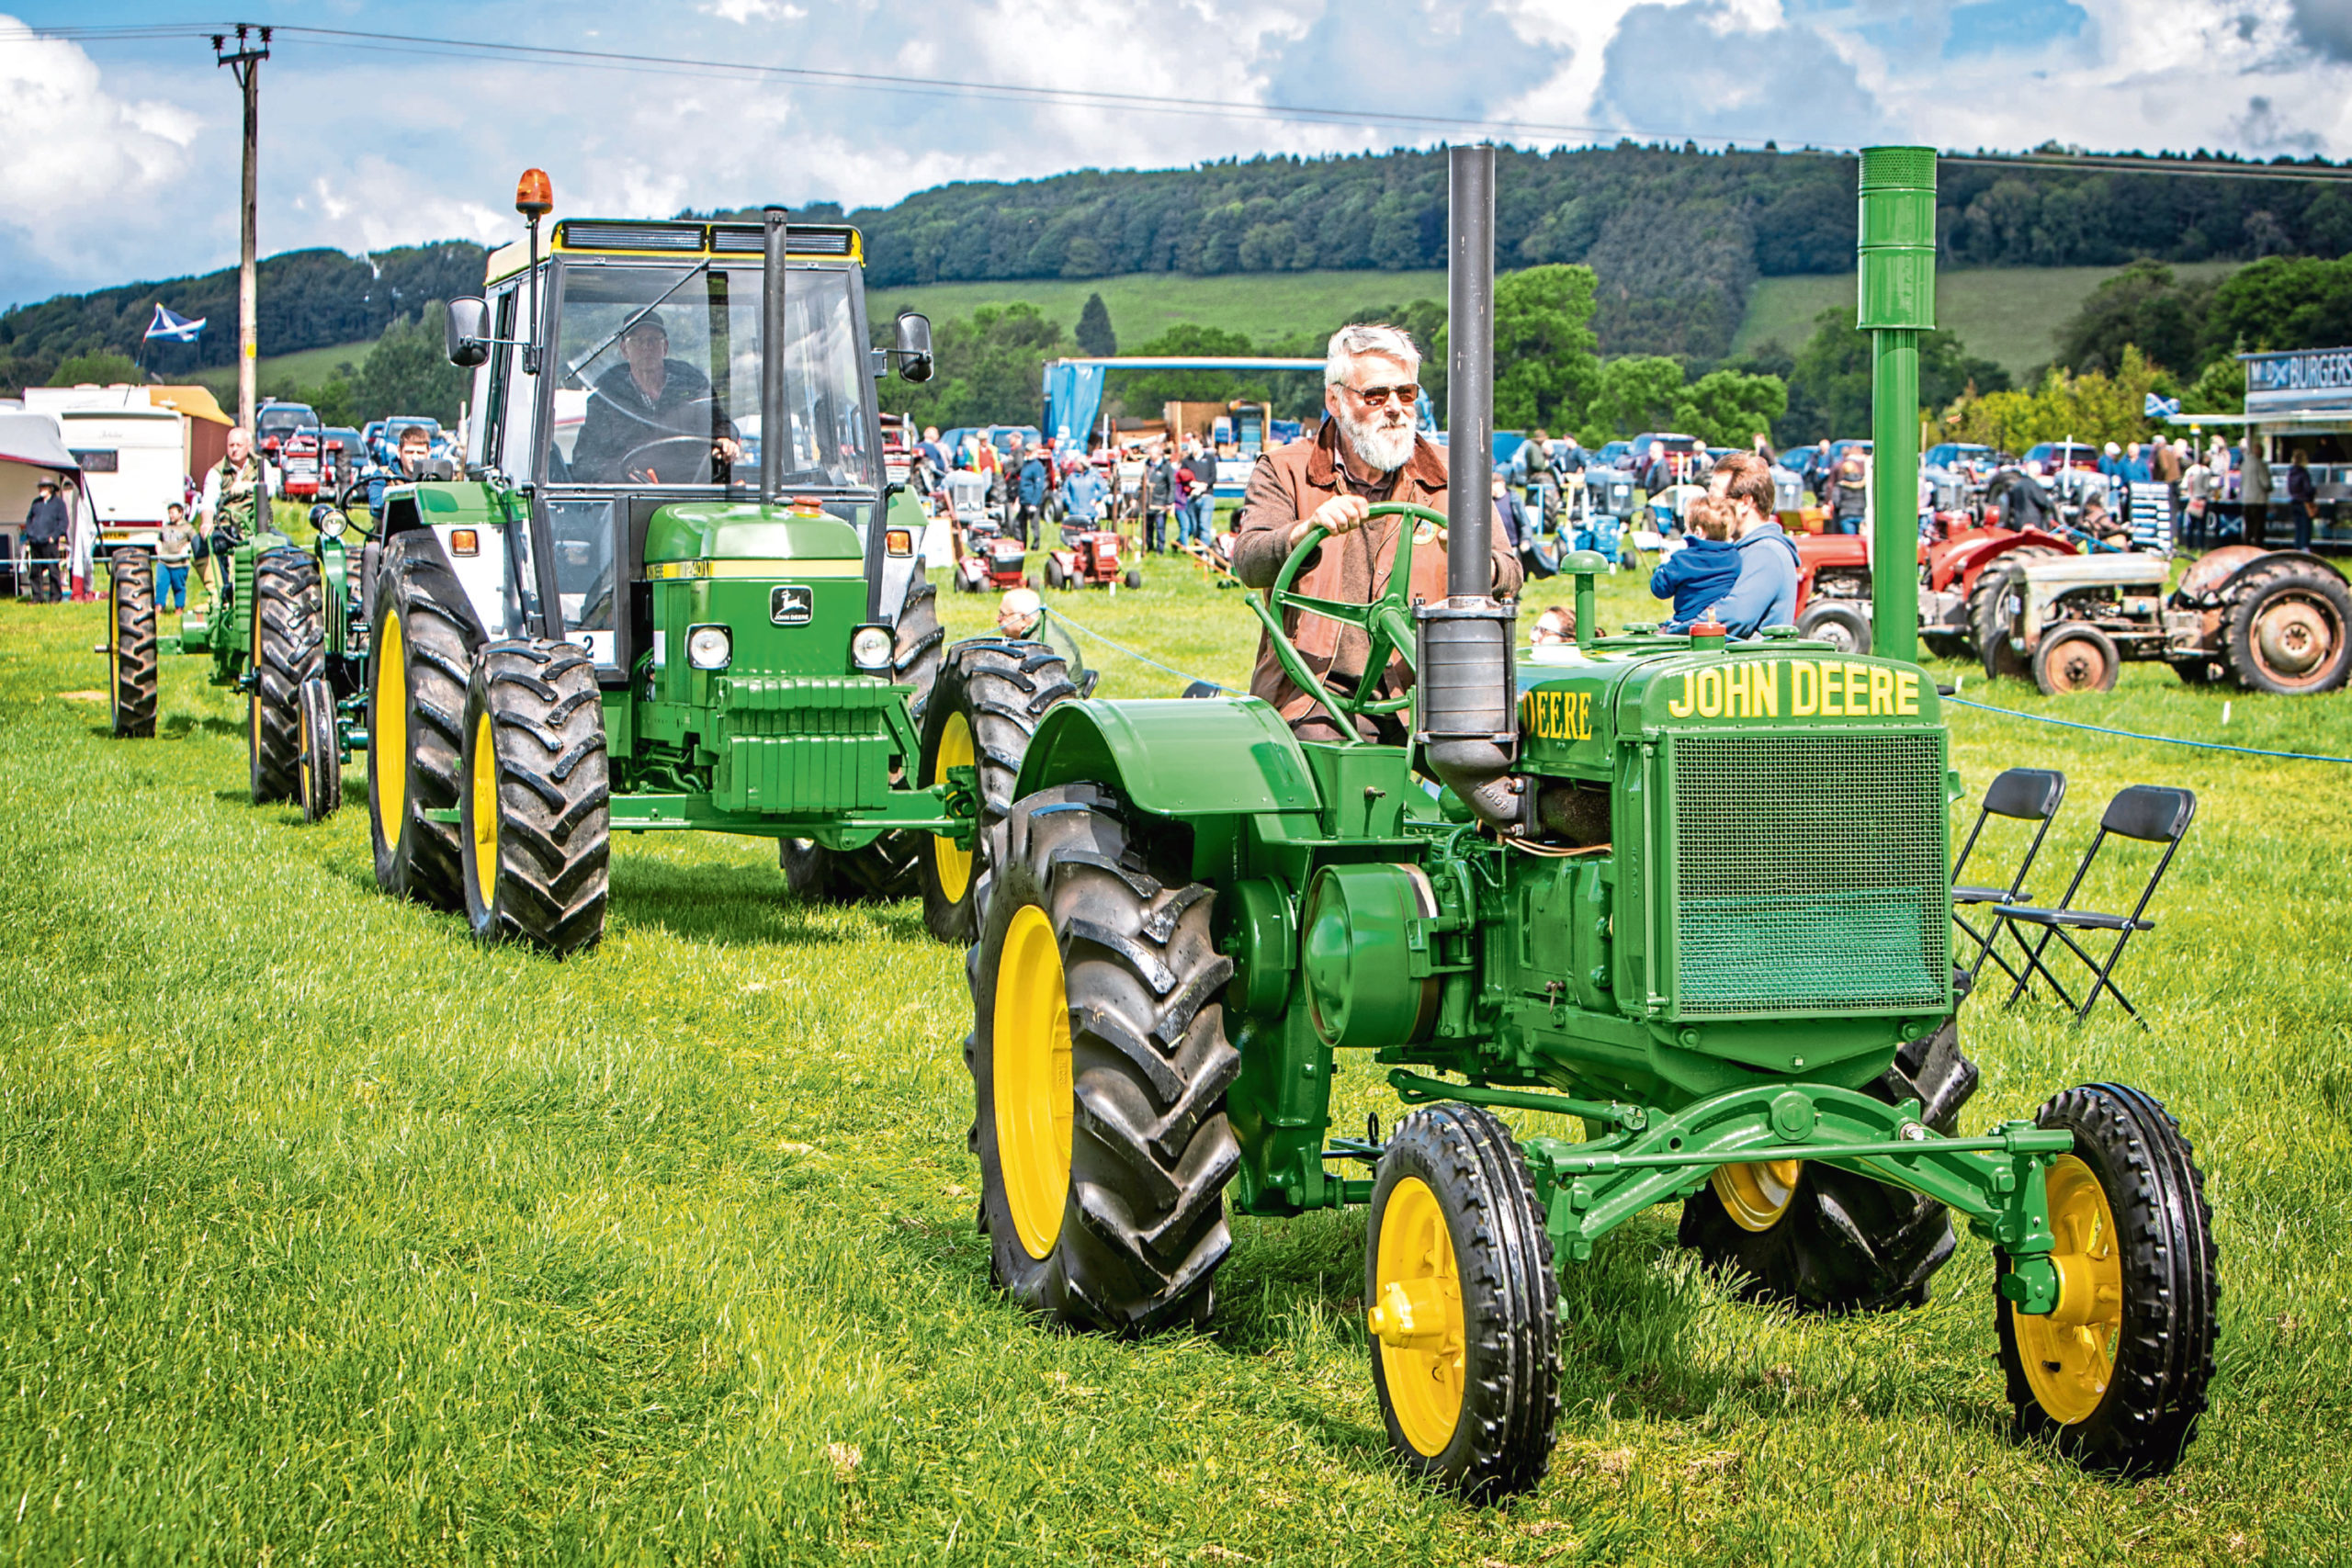 The online event will include a vintage farm machinery competition - just upload your picture